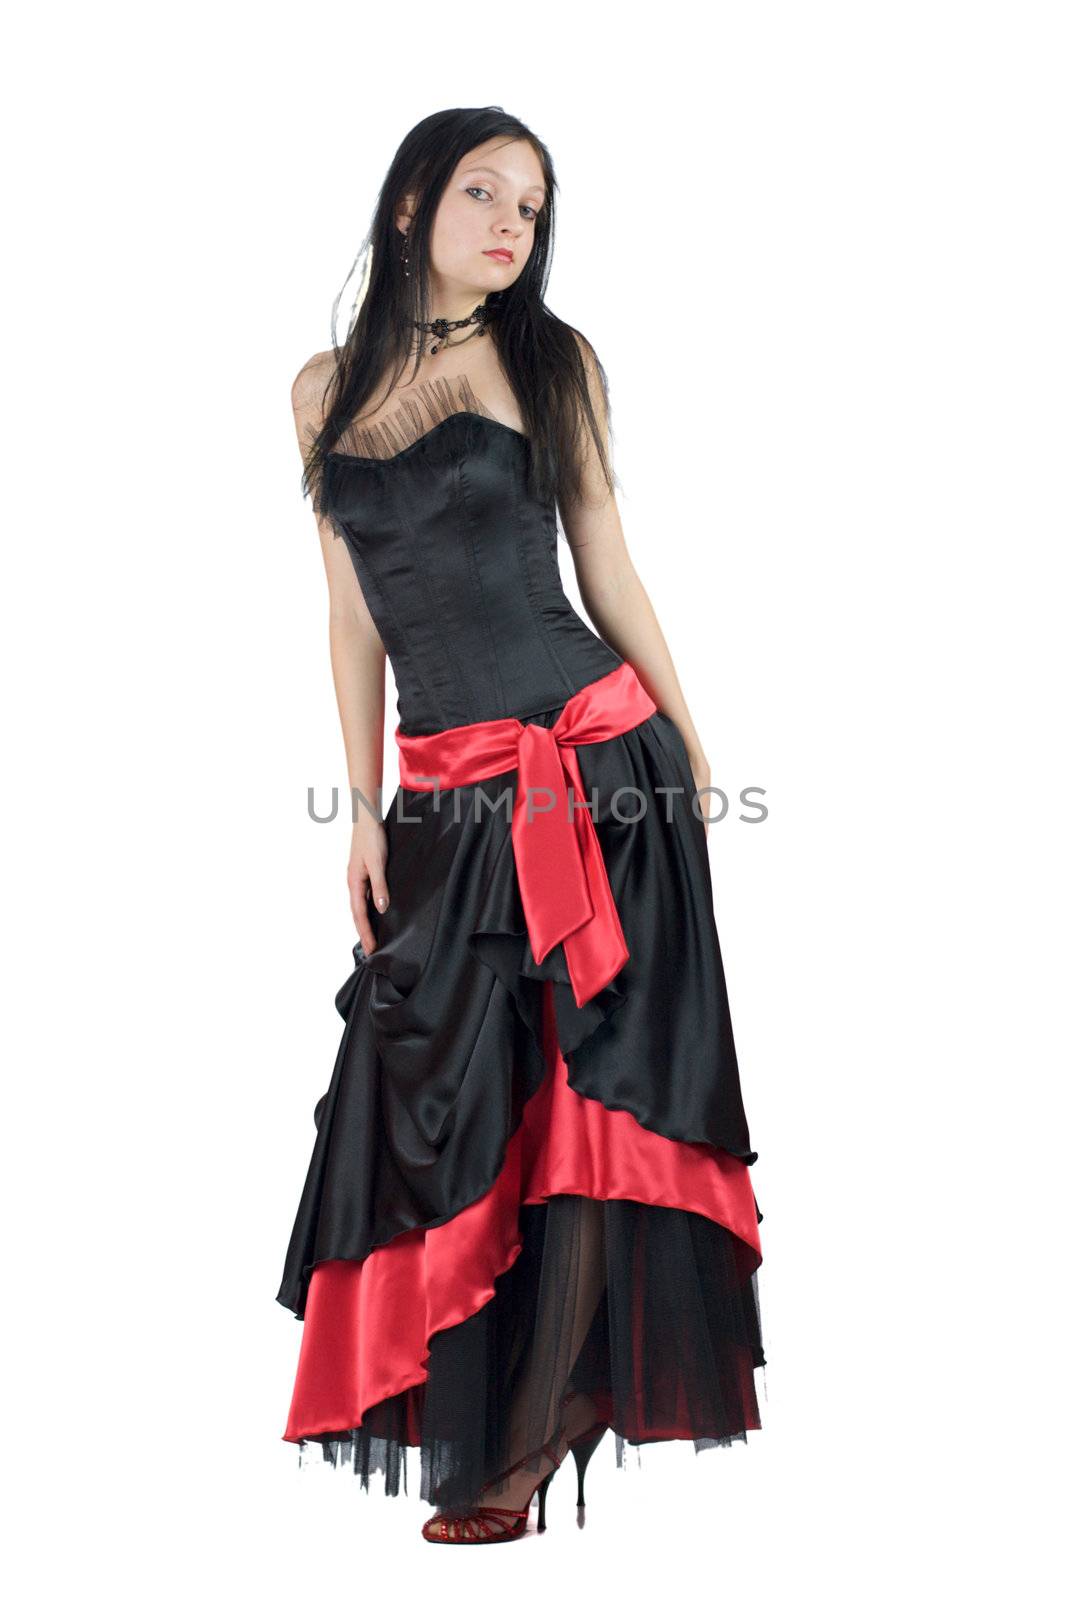 Beautiful Gothic Girl wearing black dress with red ornate isolated on white